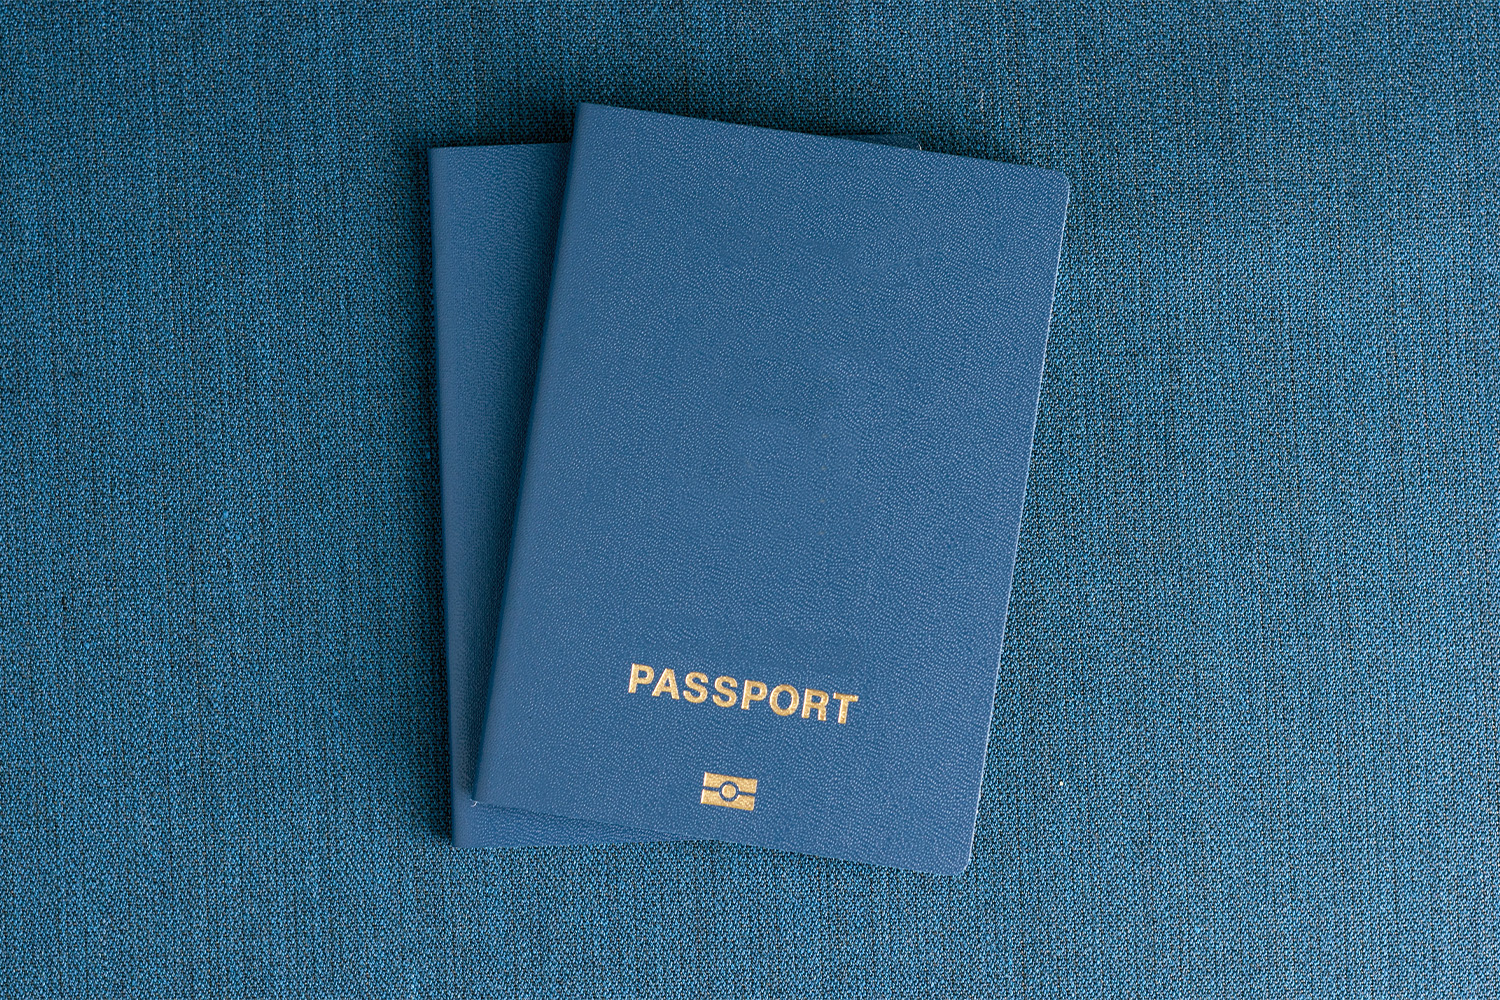 Do You Need A Temporary Passport? How and When To Get Yours Fast